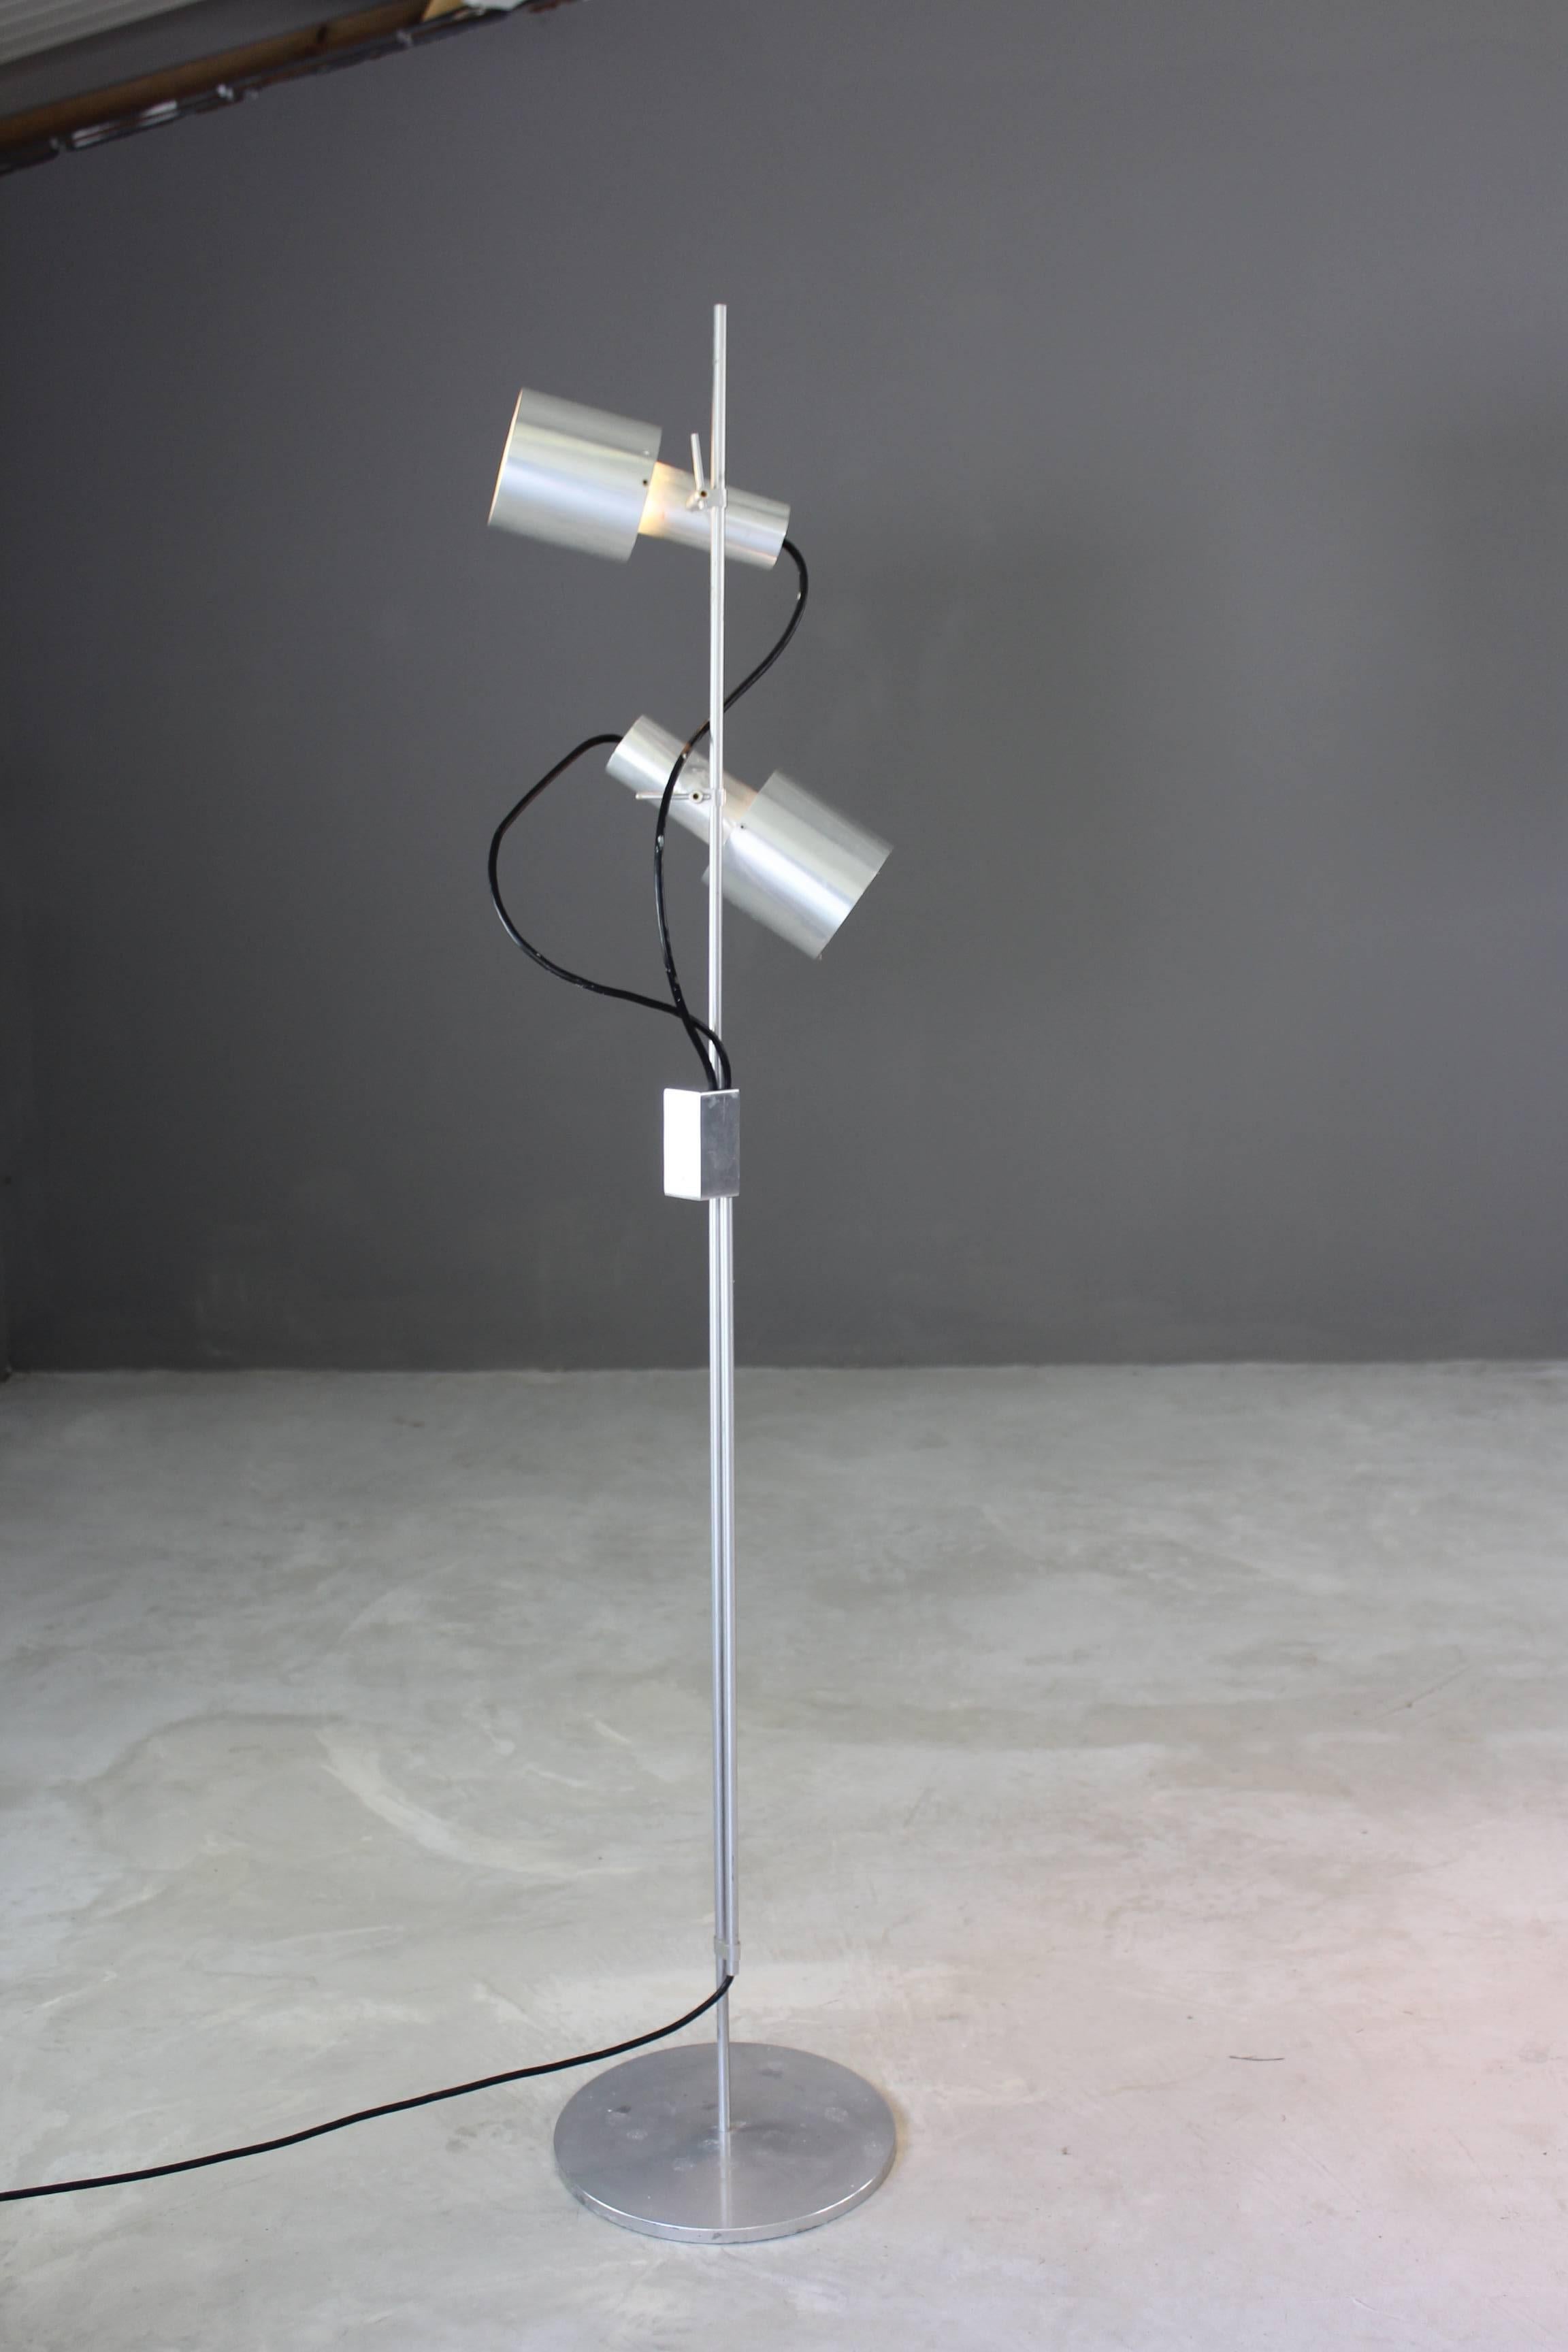 Space Age Aluminium Floor Lamp by Peter Nelson for Architectural Lighting